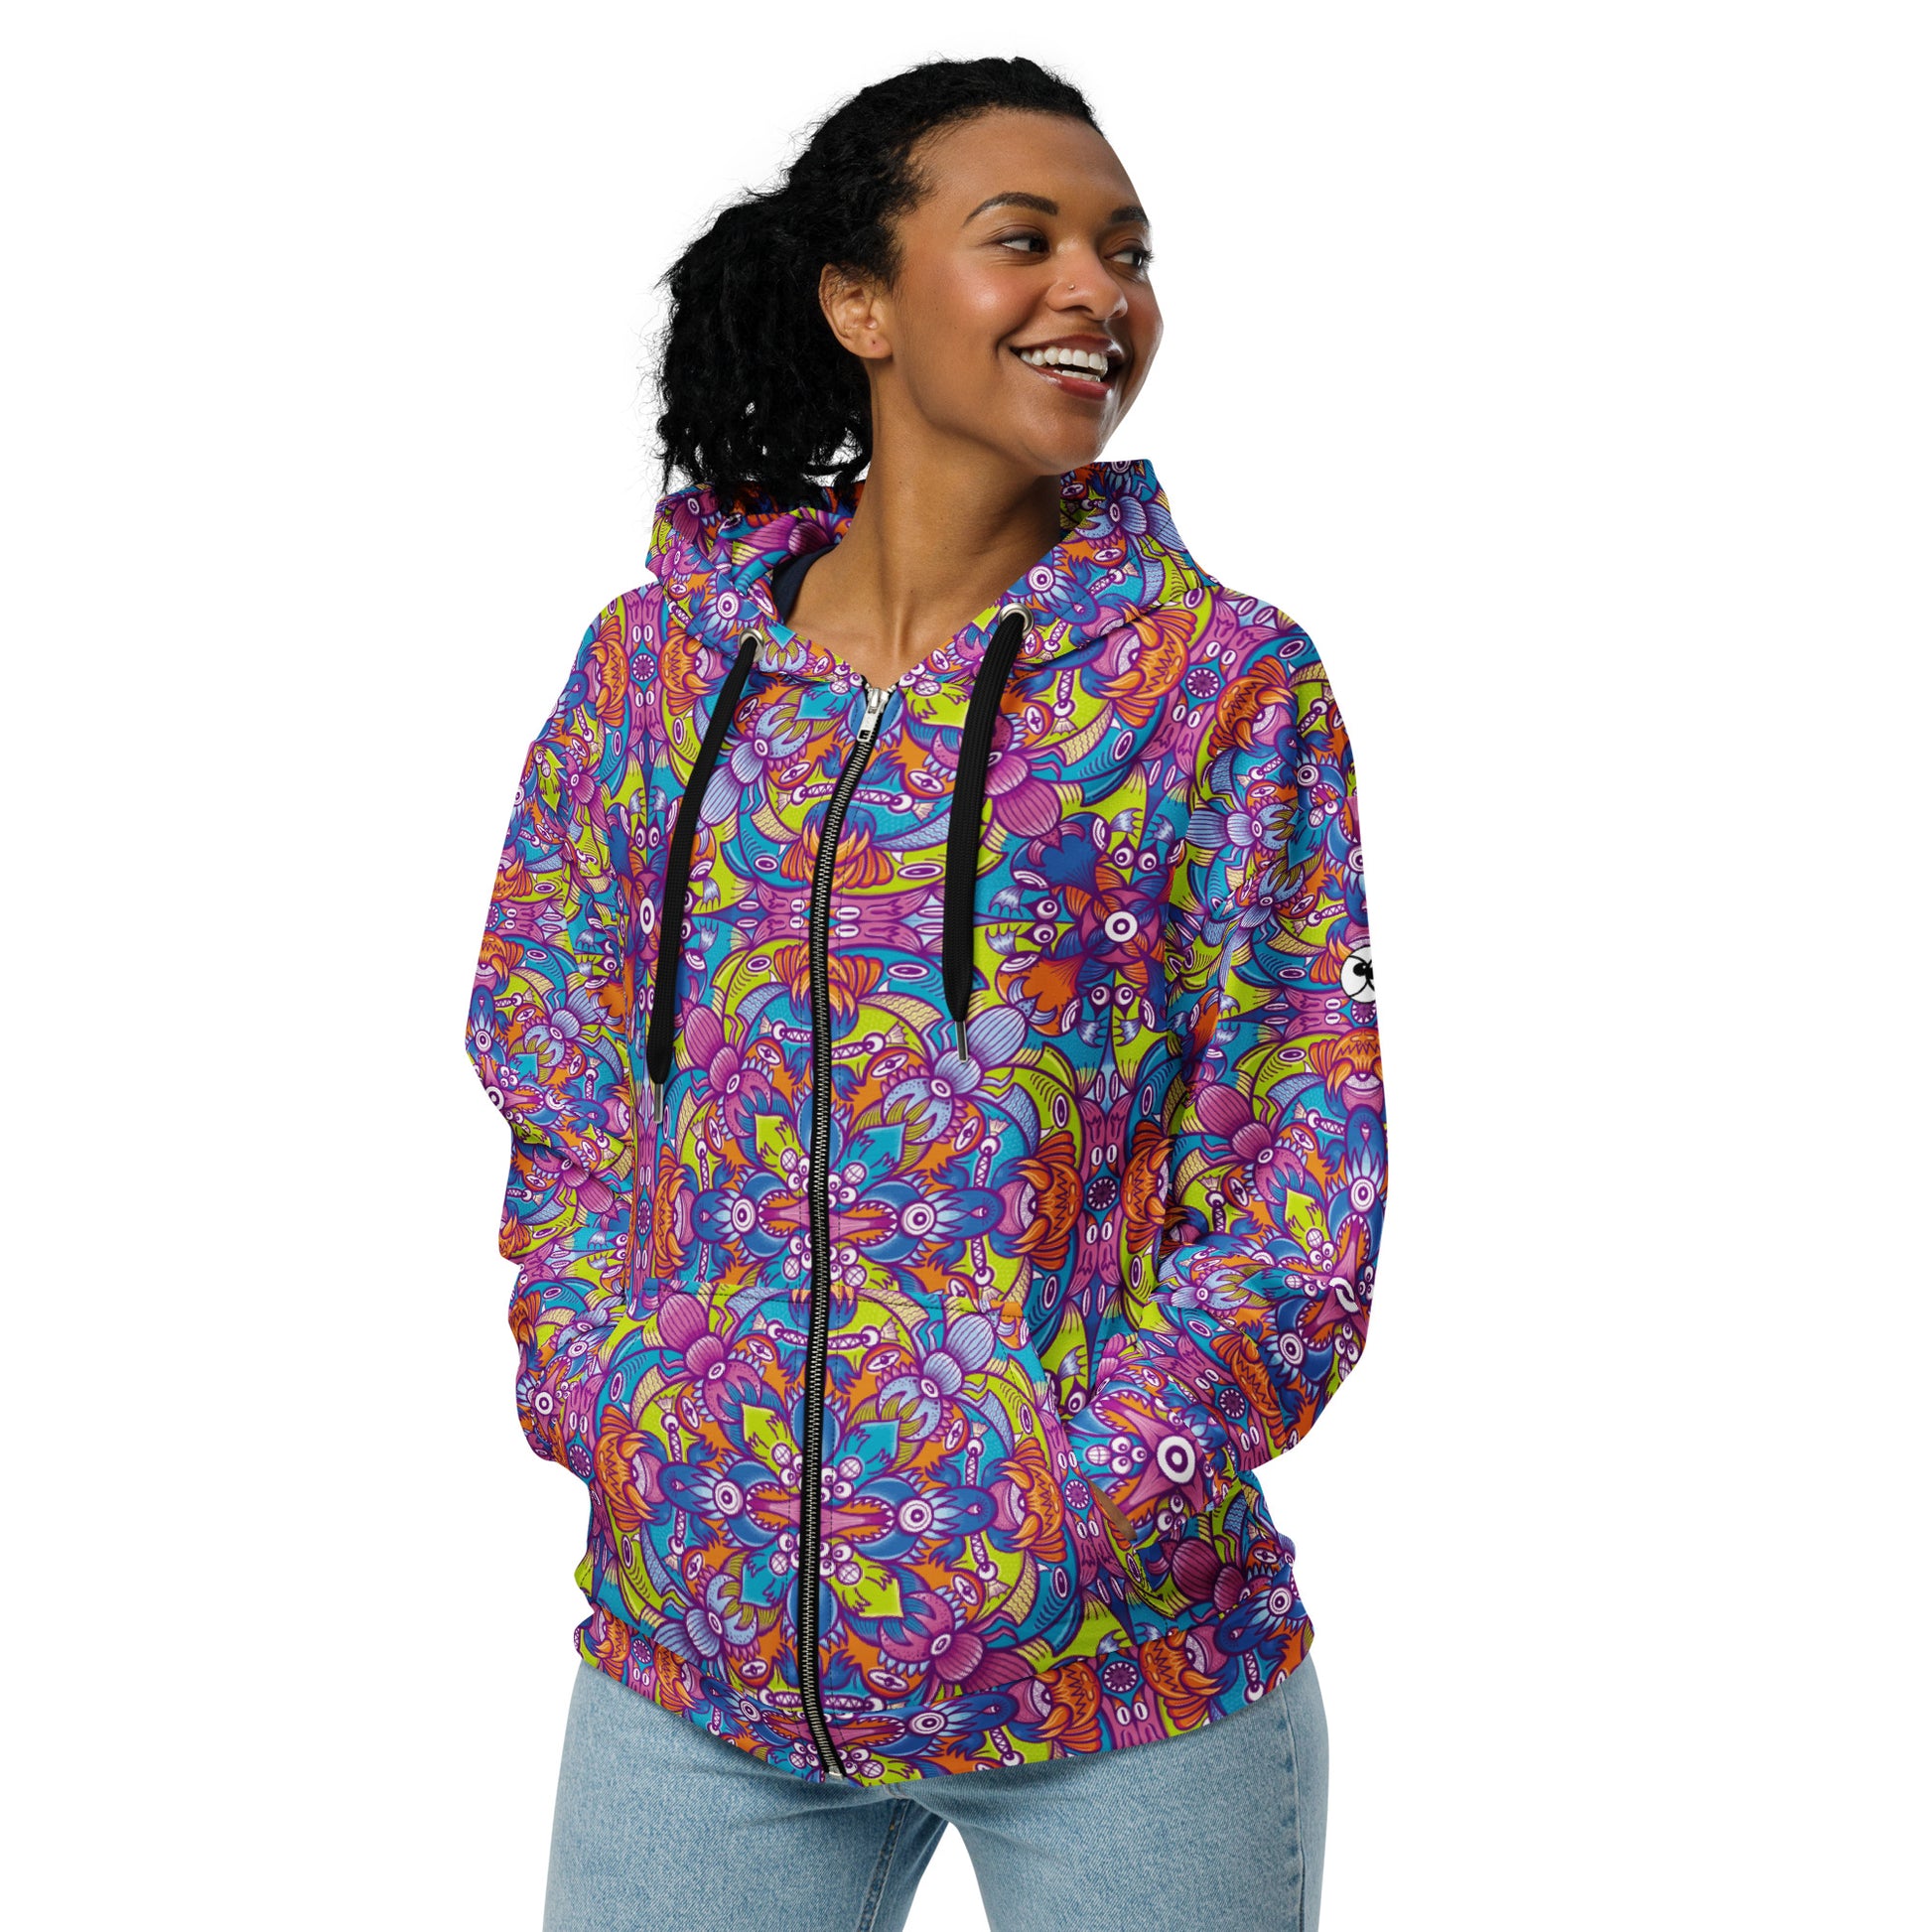 Whimsical Critter Chaos: A Doodle Adventure - Unisex zip hoodie. Front view